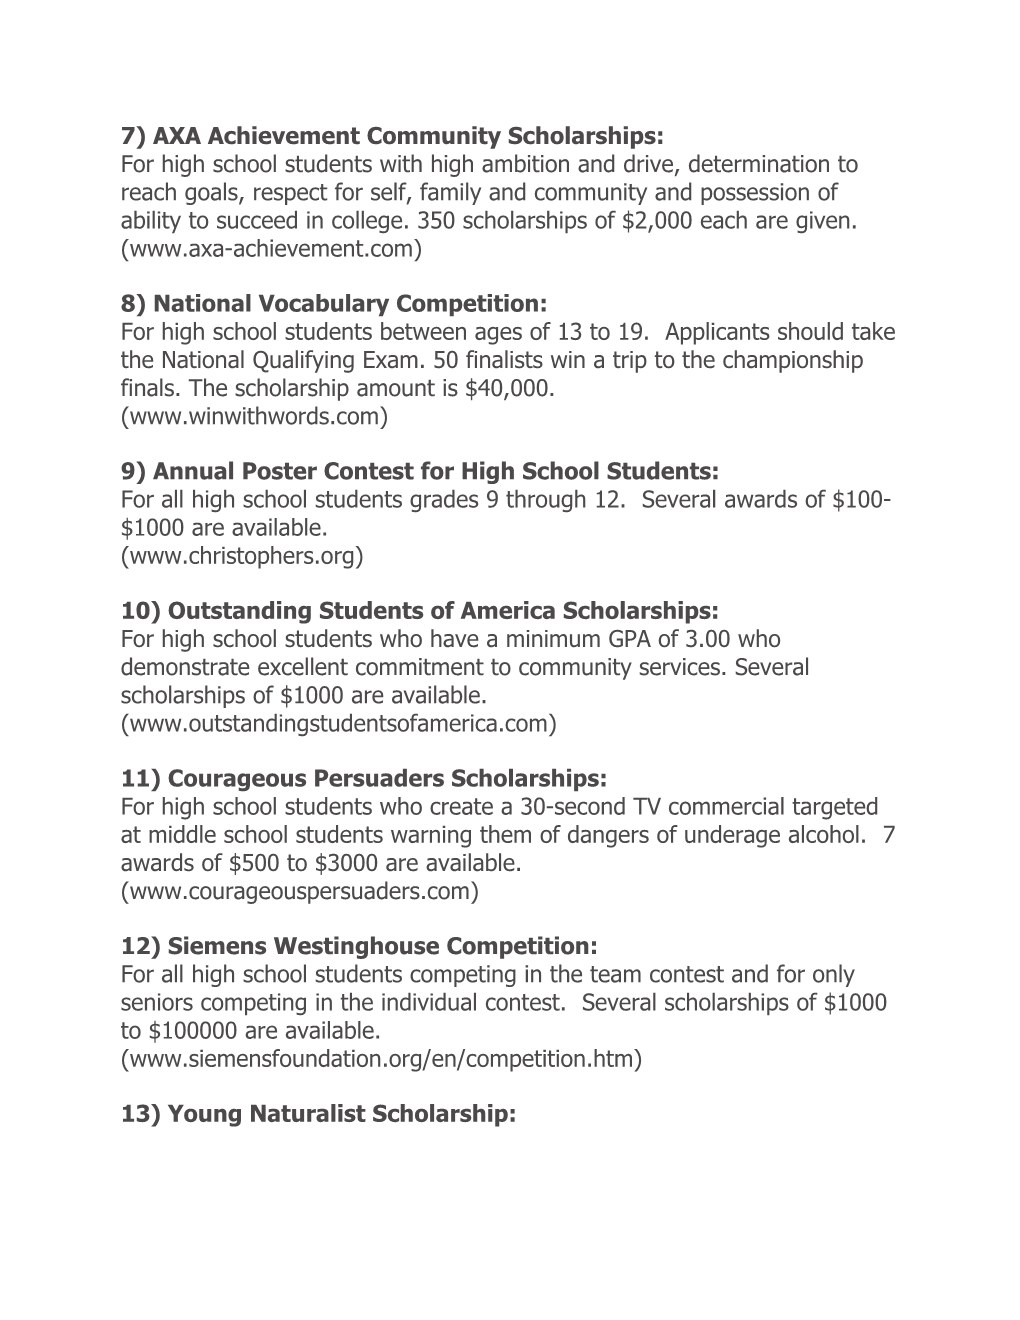 Here Is Our Most Recent List of Scholarships for High School Juniors. the List Is Valid